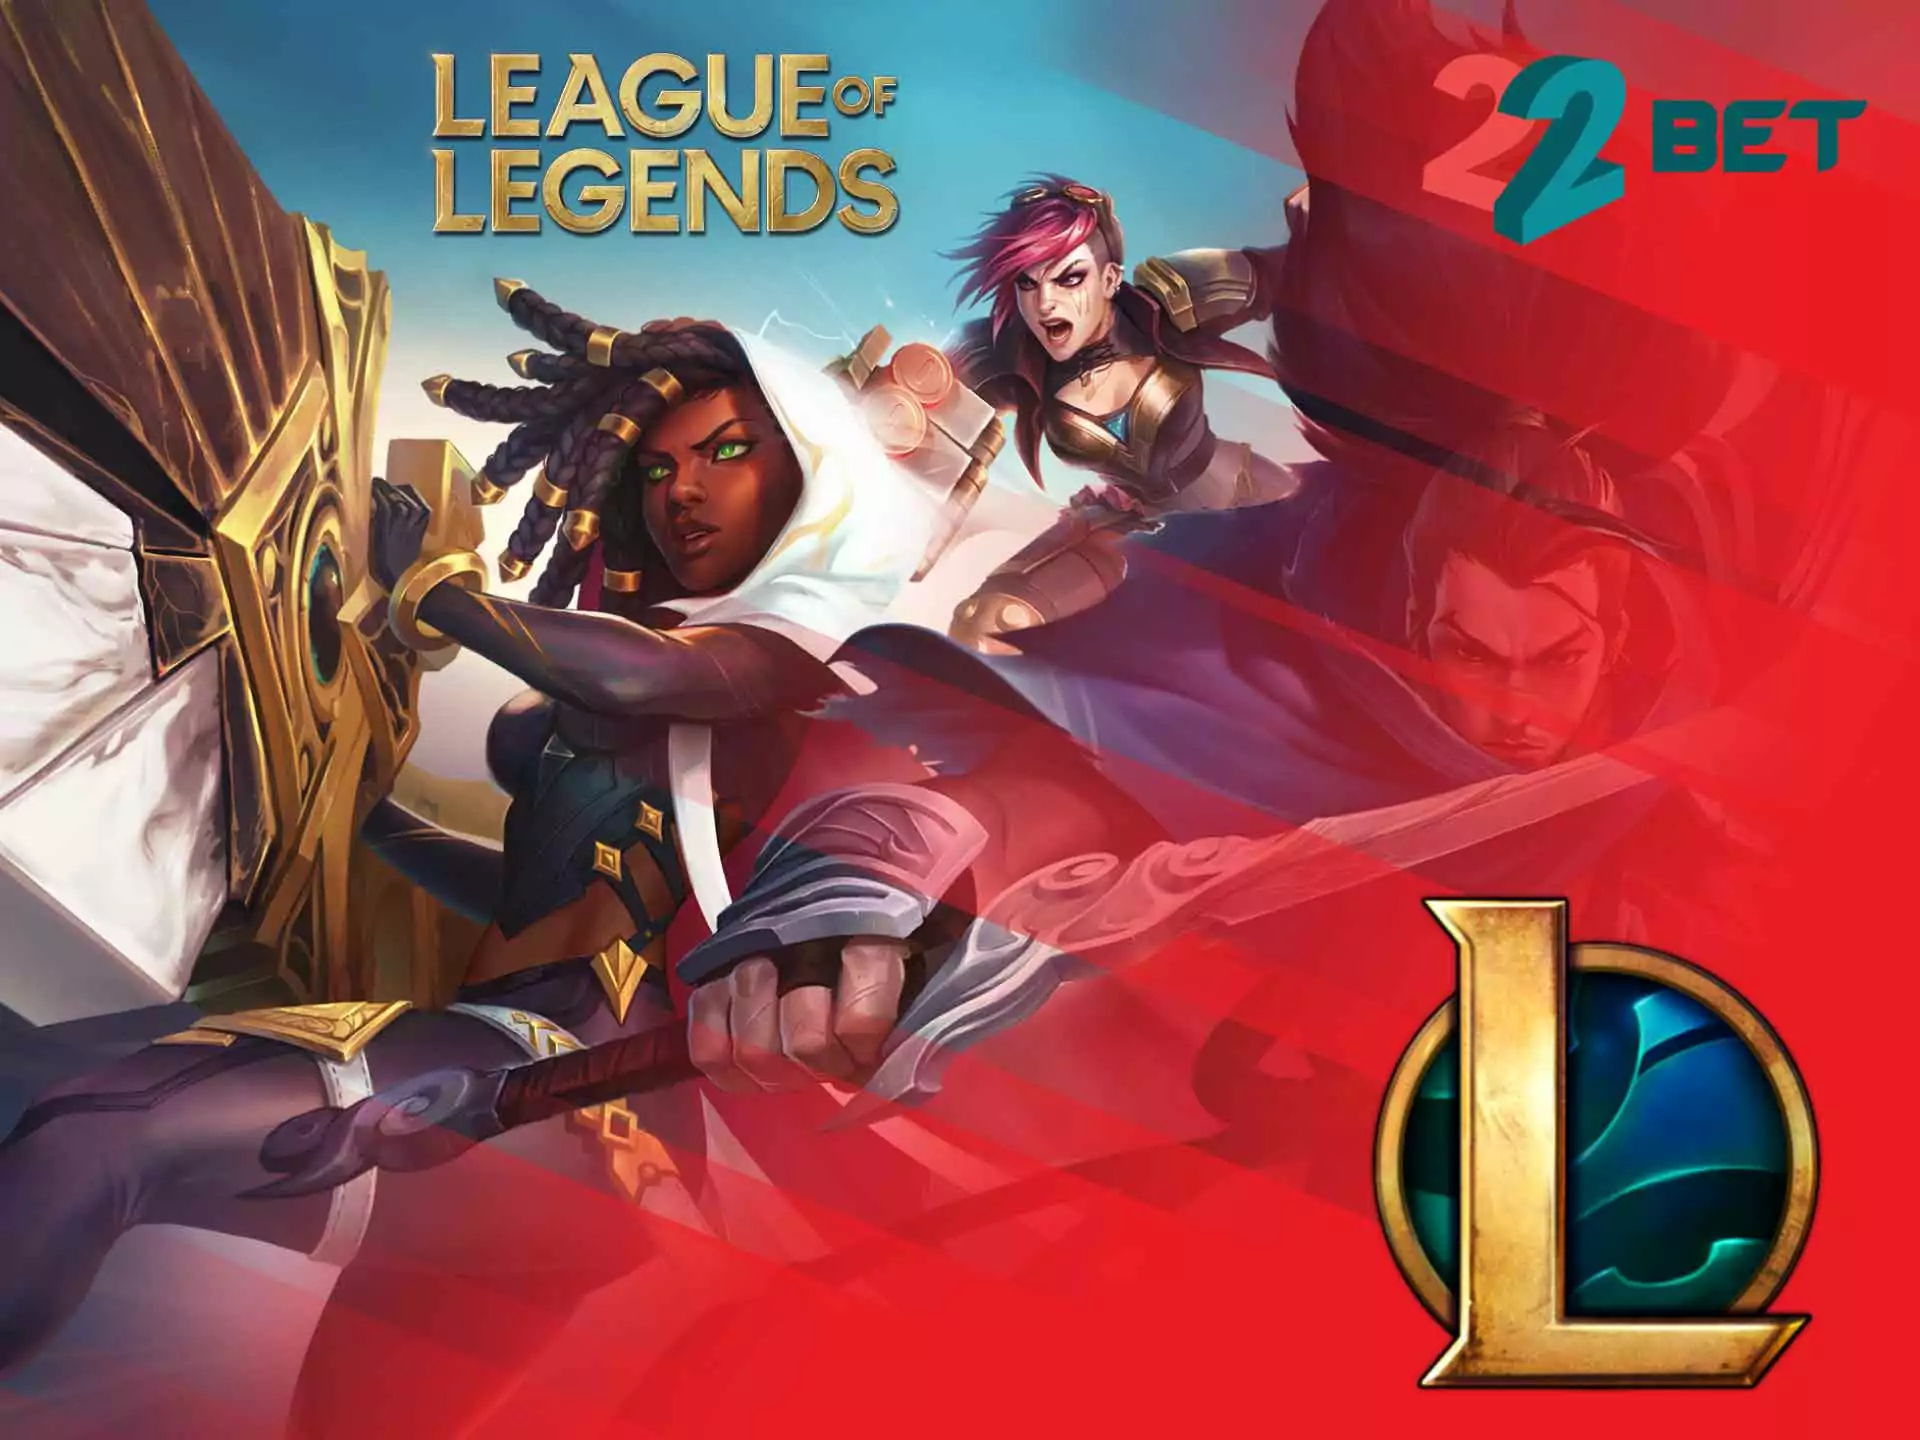 The LOL betting is available on 22bet.